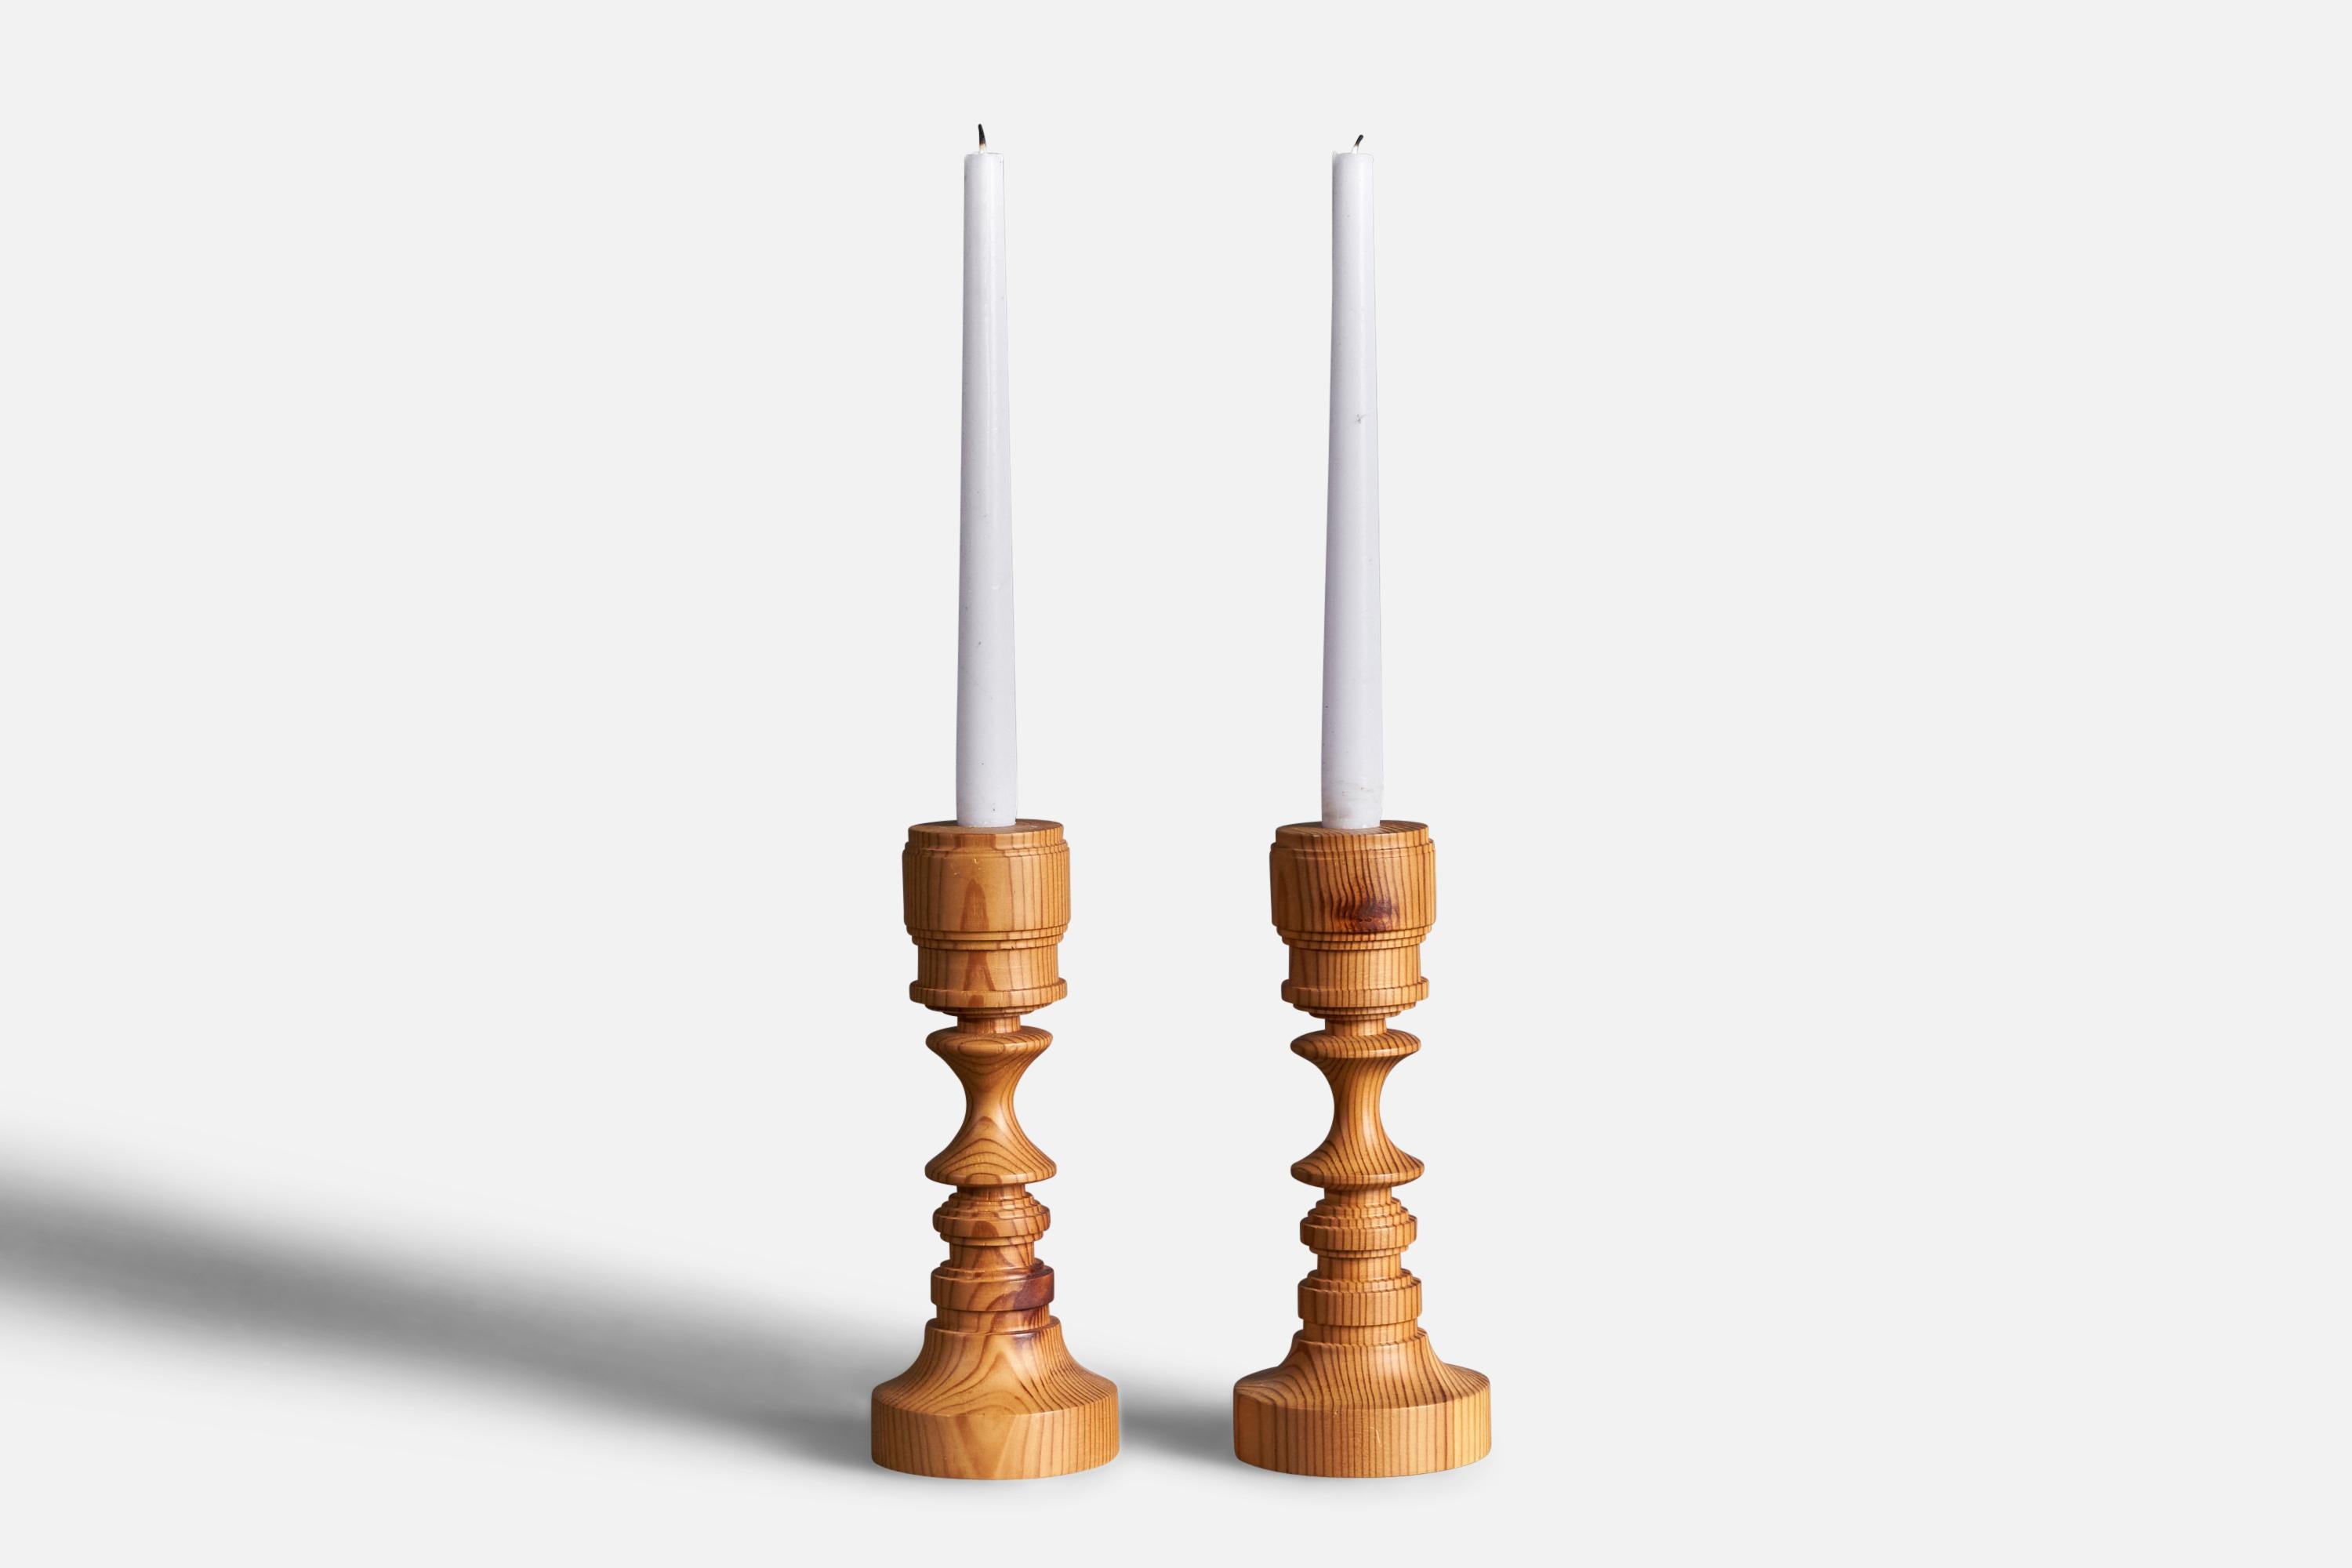 A pair of turned pine candlesticks designed and produced in Sweden, 1970s.